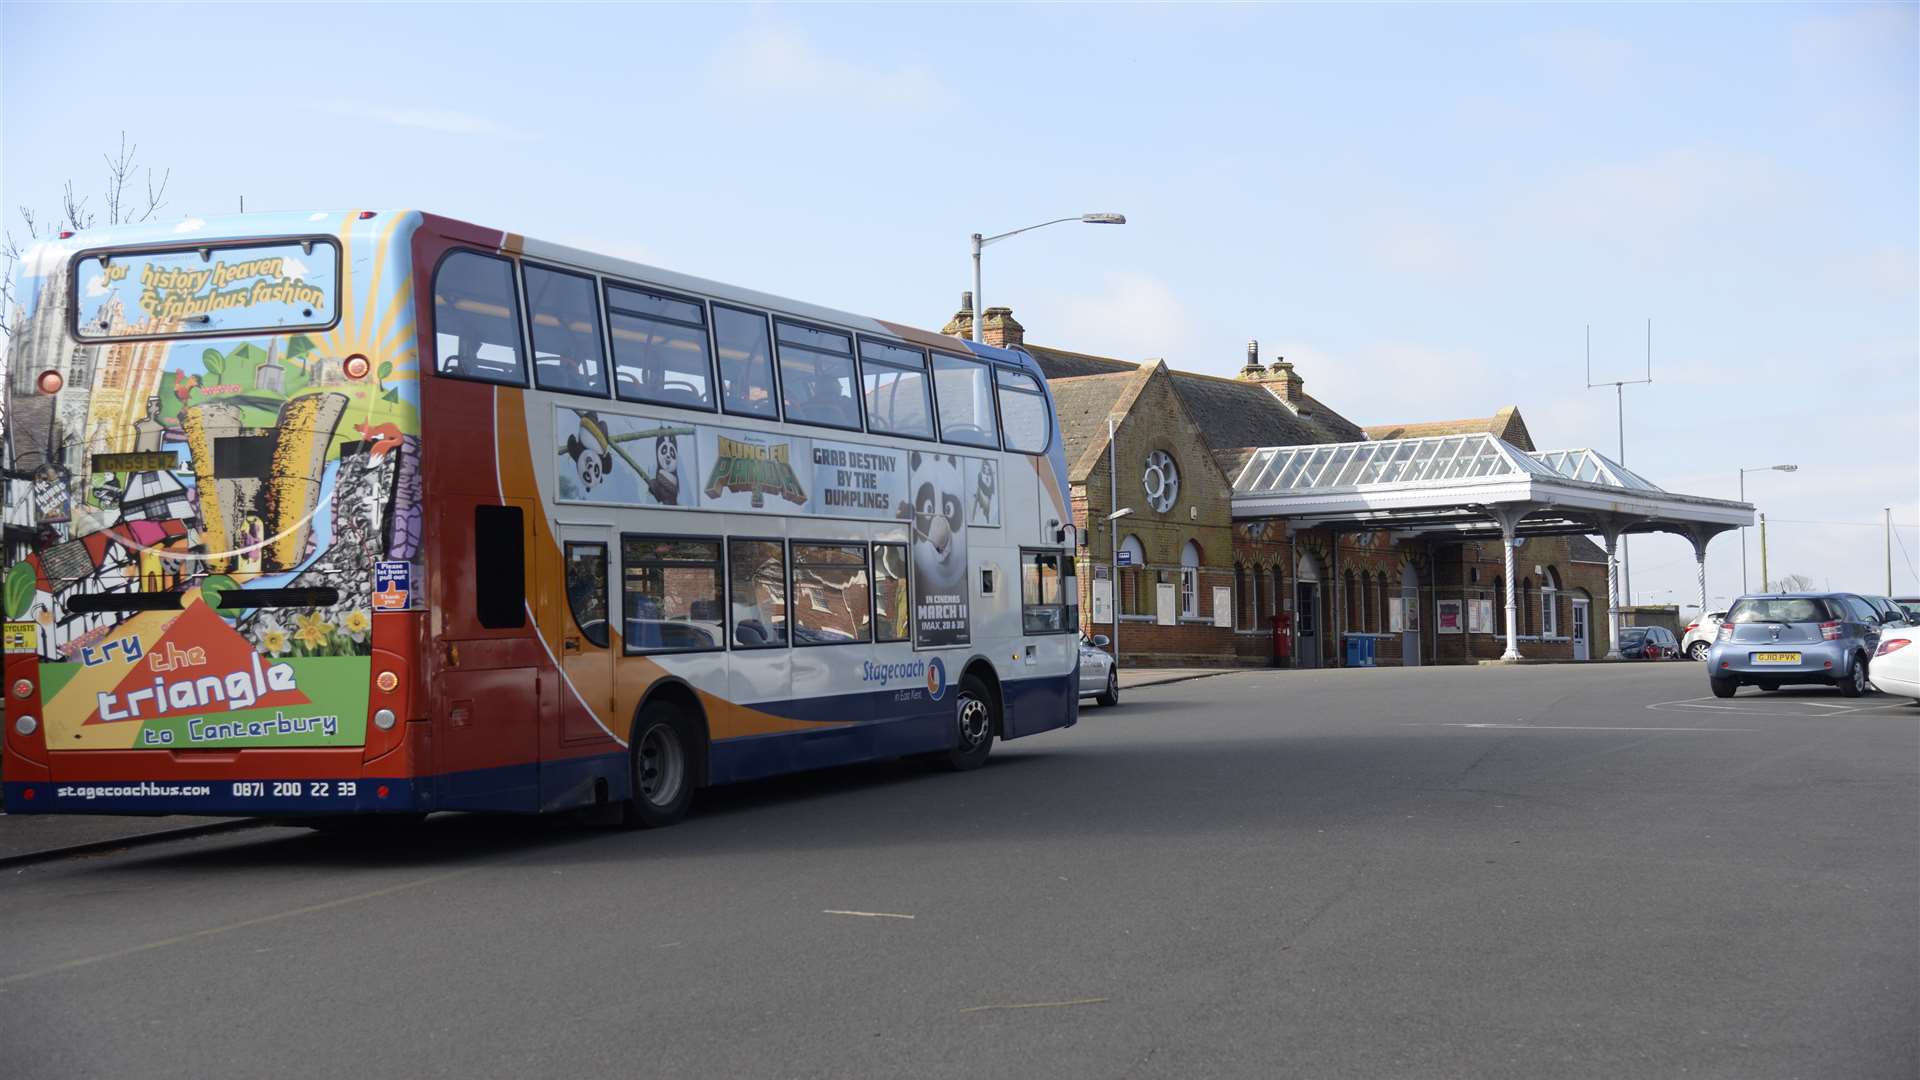 The park and ride could run from Herne Bay railway station